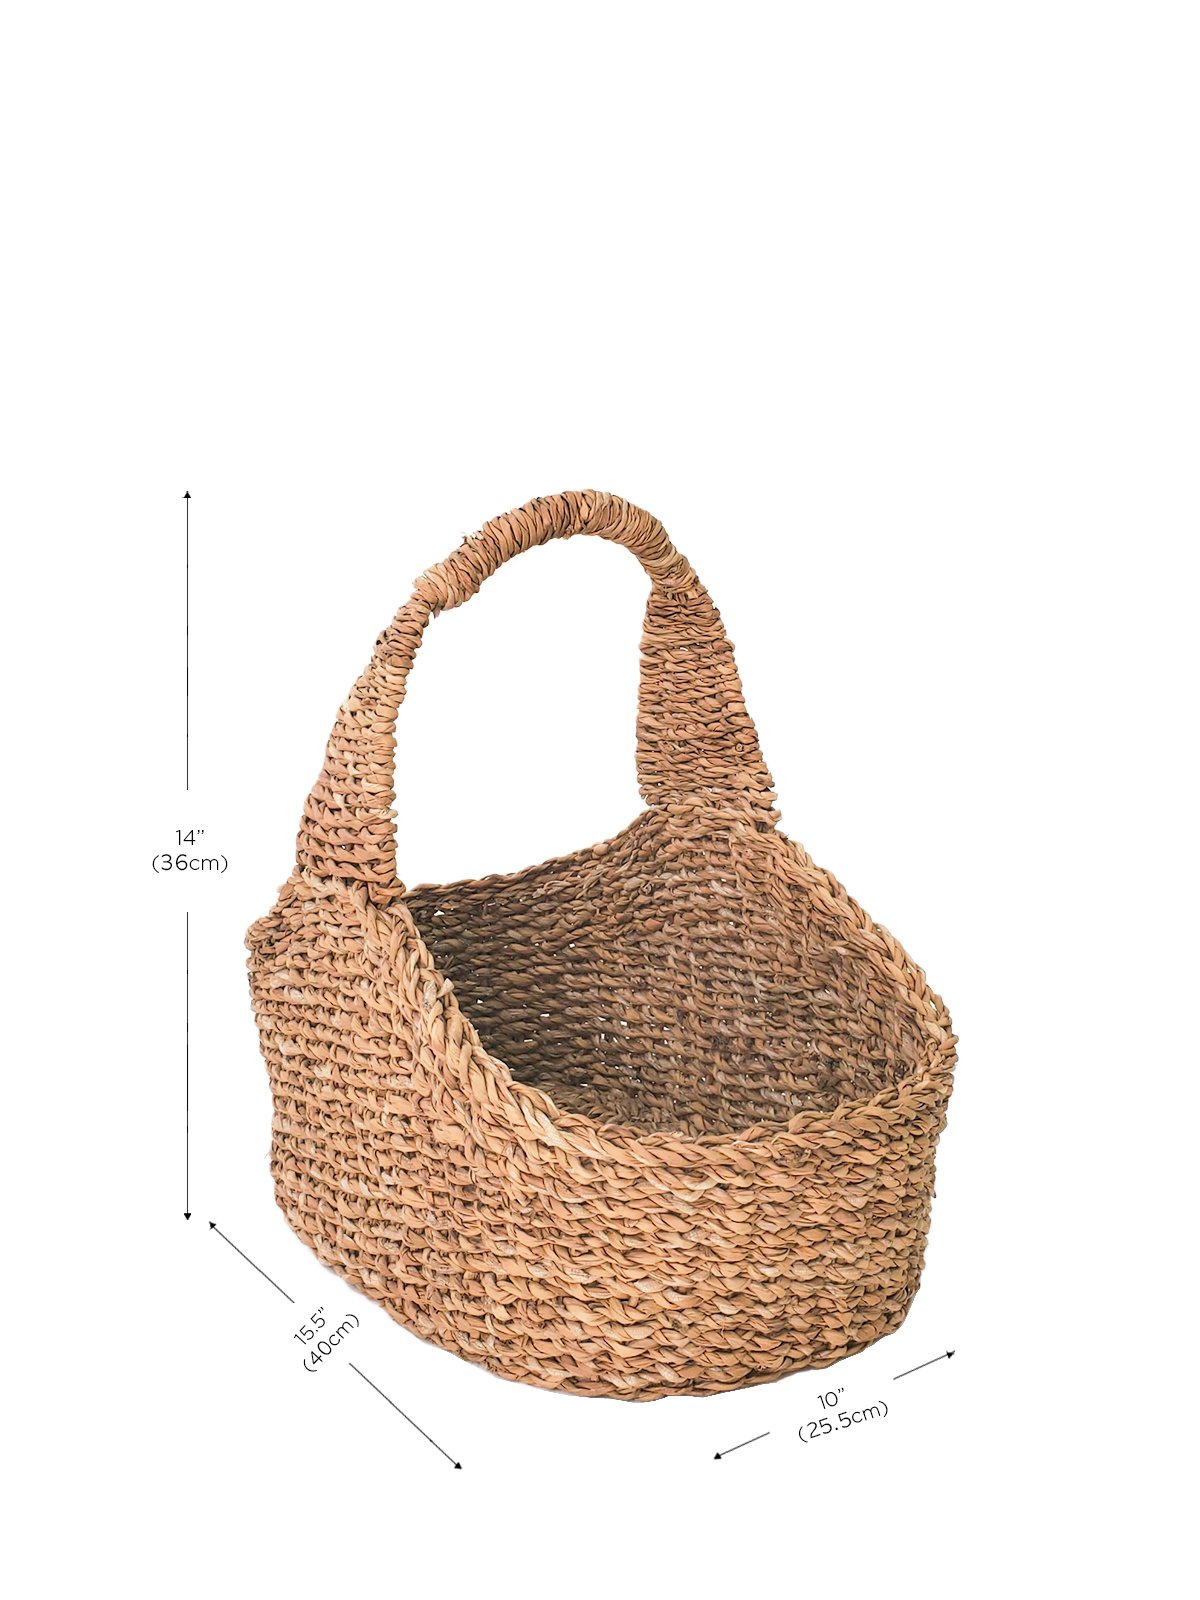 basket with dimensions 